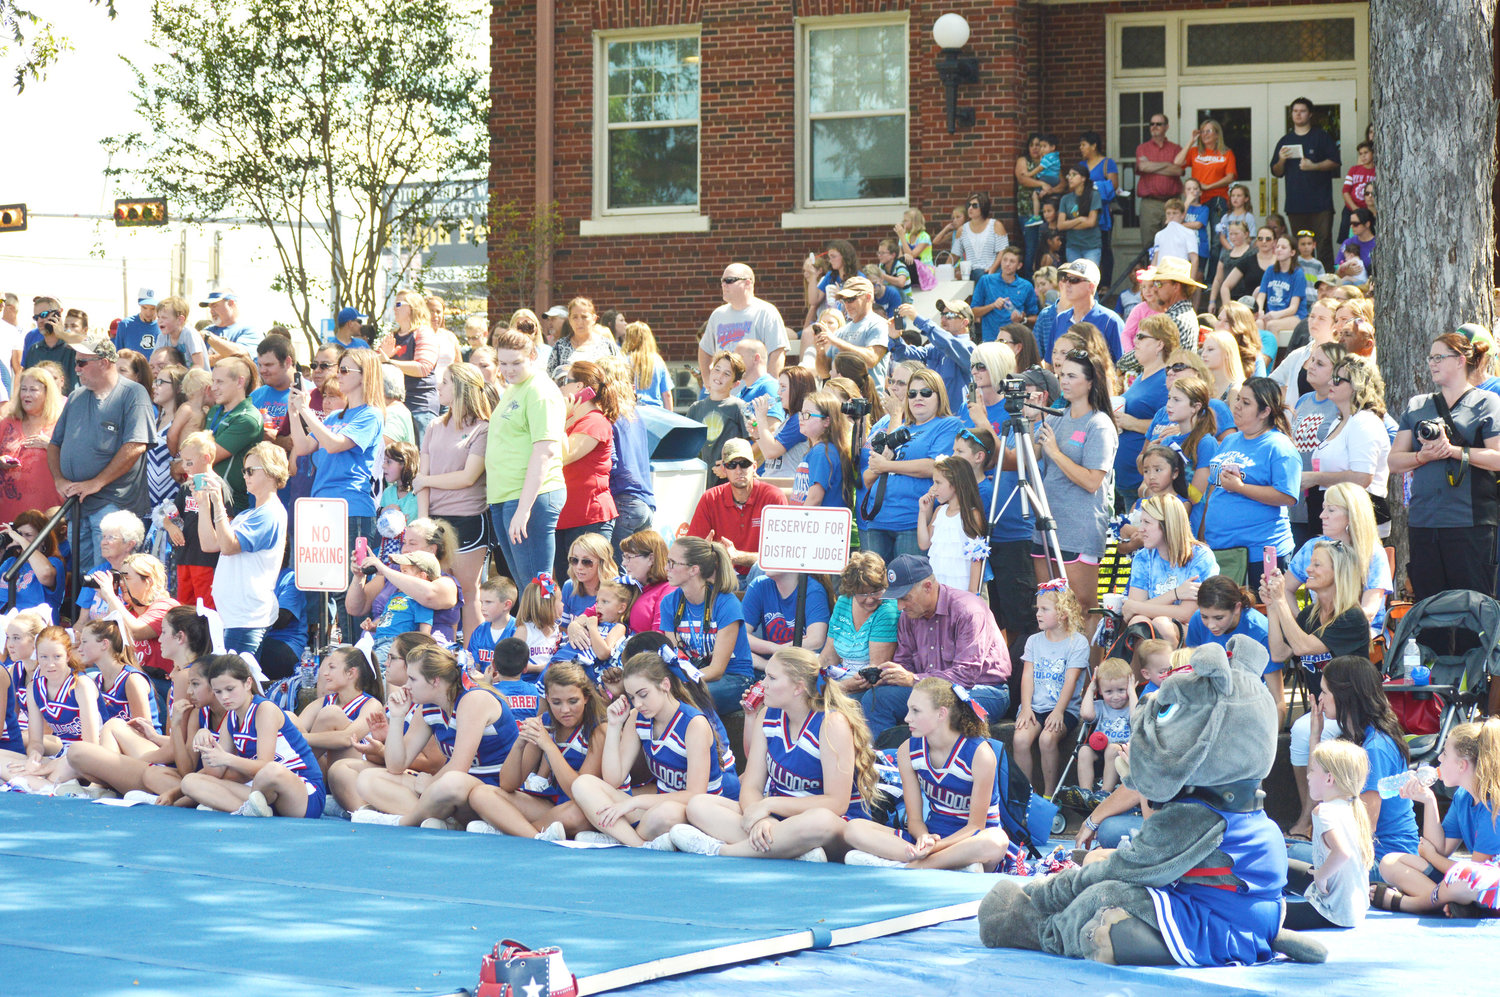 There was a great crowd ready for the homecoming pep rally on the north side of the courthouse Friday afternoon in Quitman.